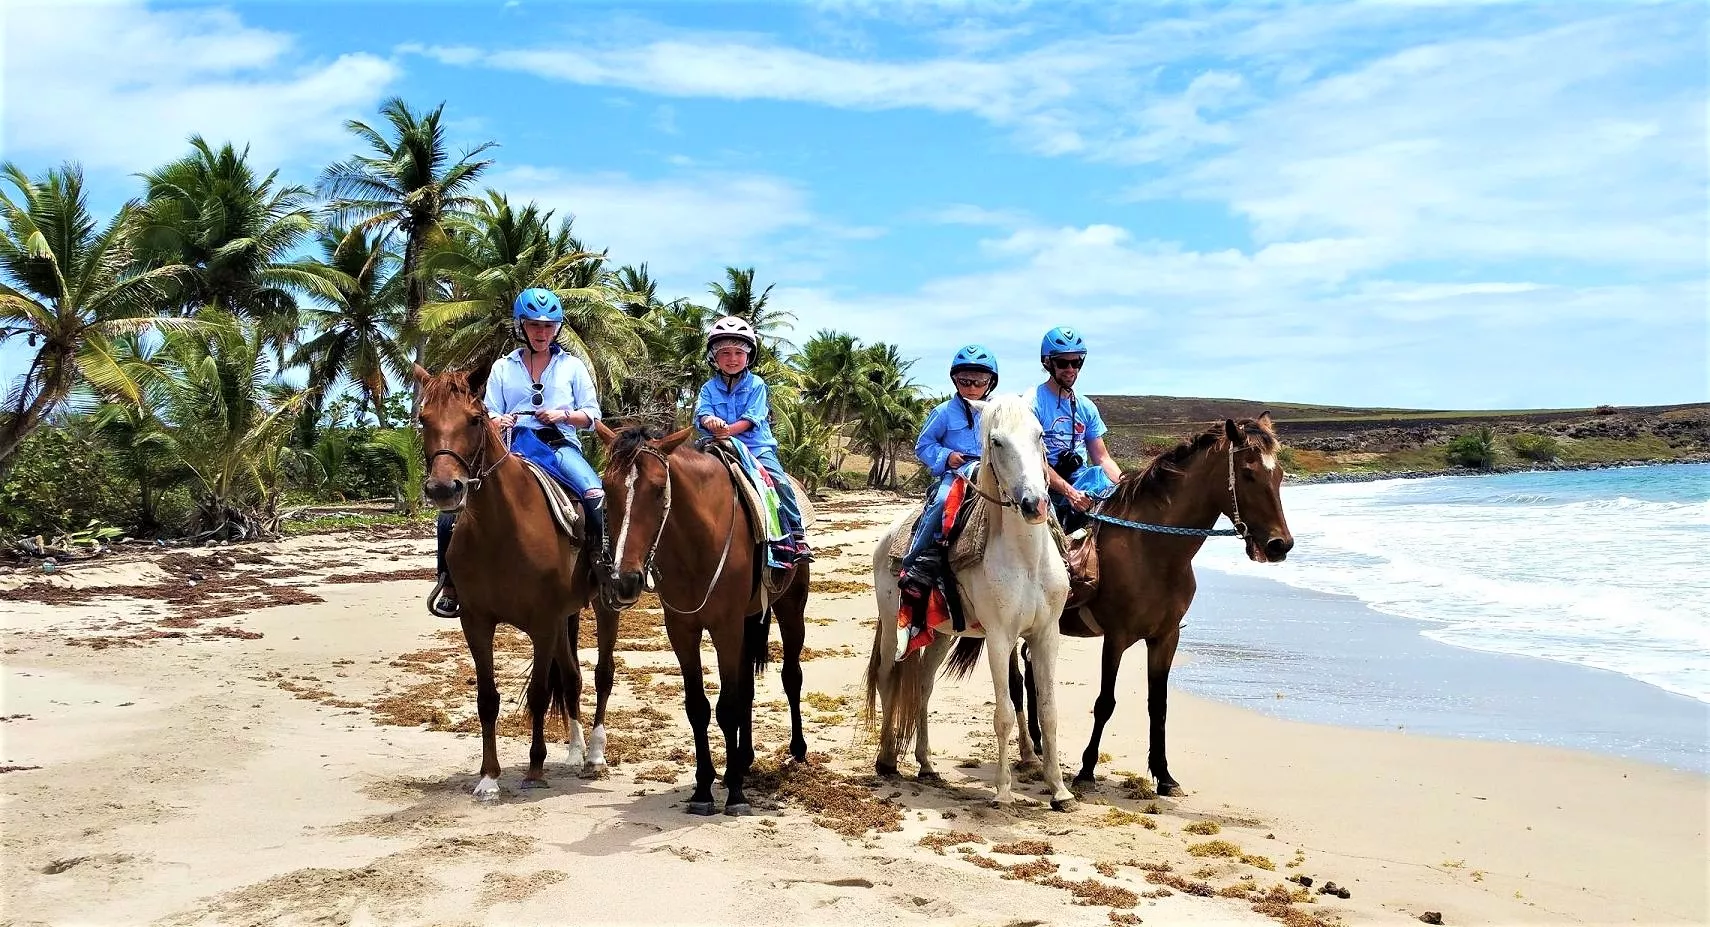 Ride St. Lucia in Saint Lucia, Caribbean | Horseback Riding - Rated 1